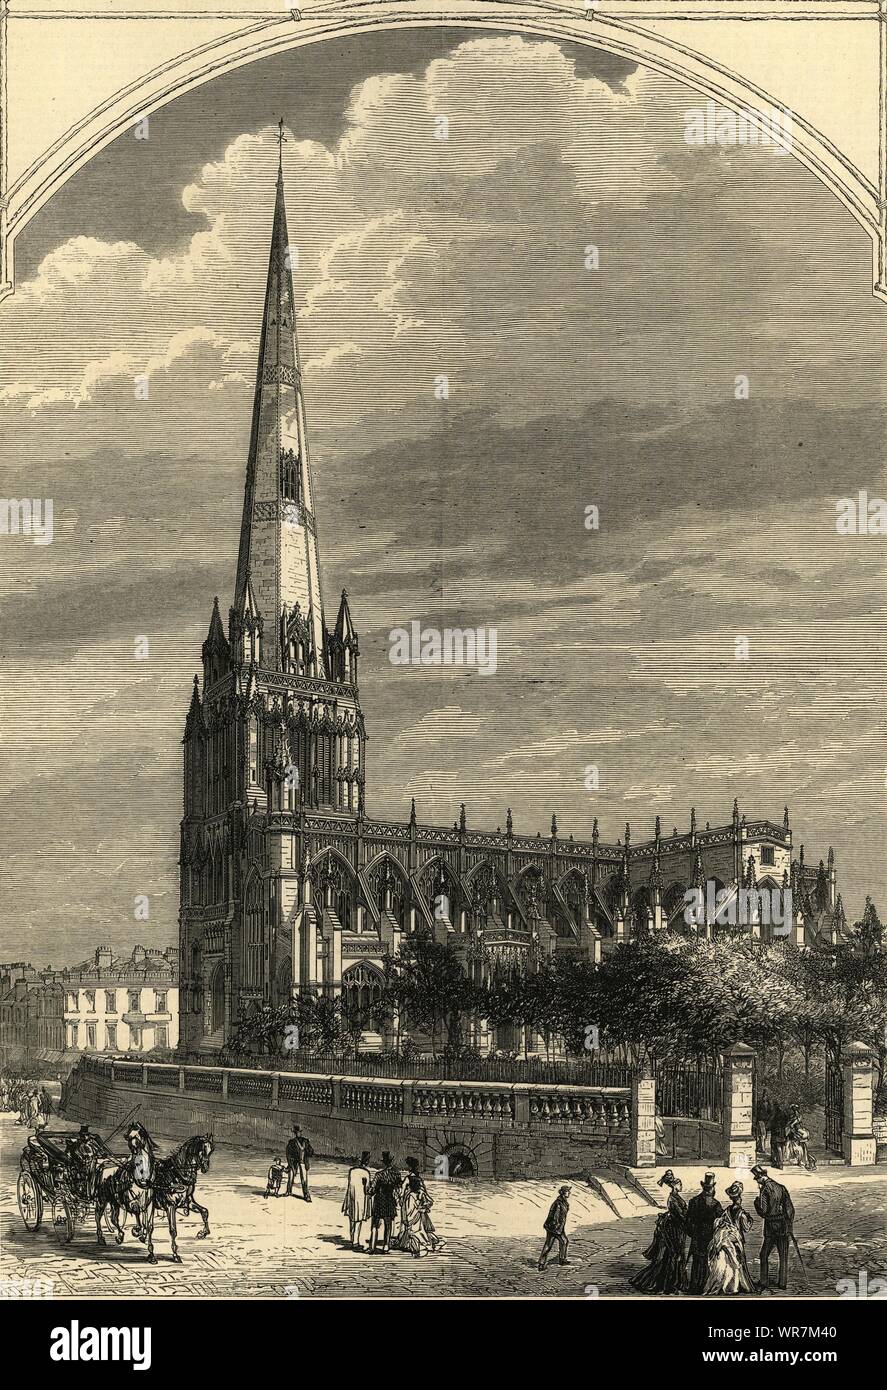 St. Mary Redcliffe church, Bristol 1875 antique ILN full page print Stock Photo